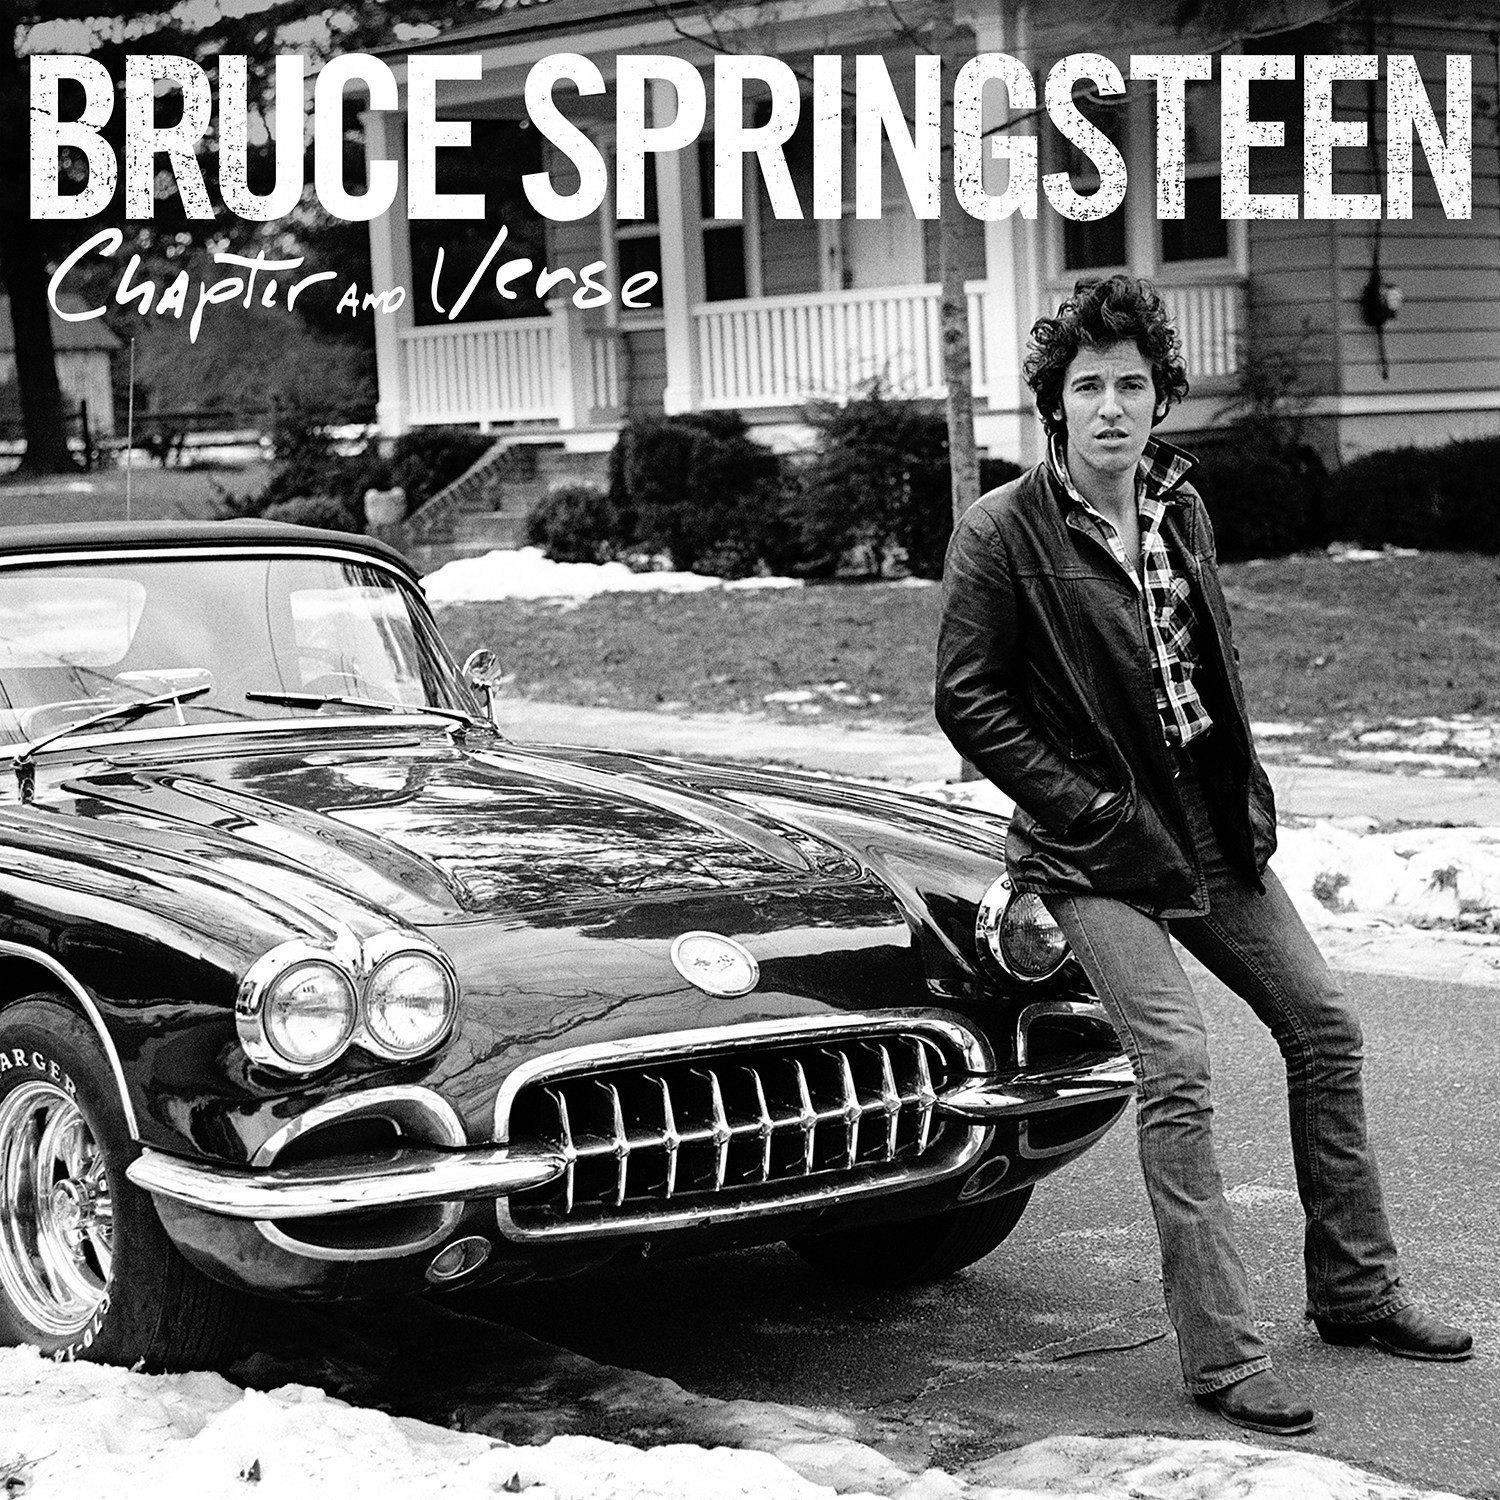 Bruce Springsteen - Chapter And Verse 2XLP